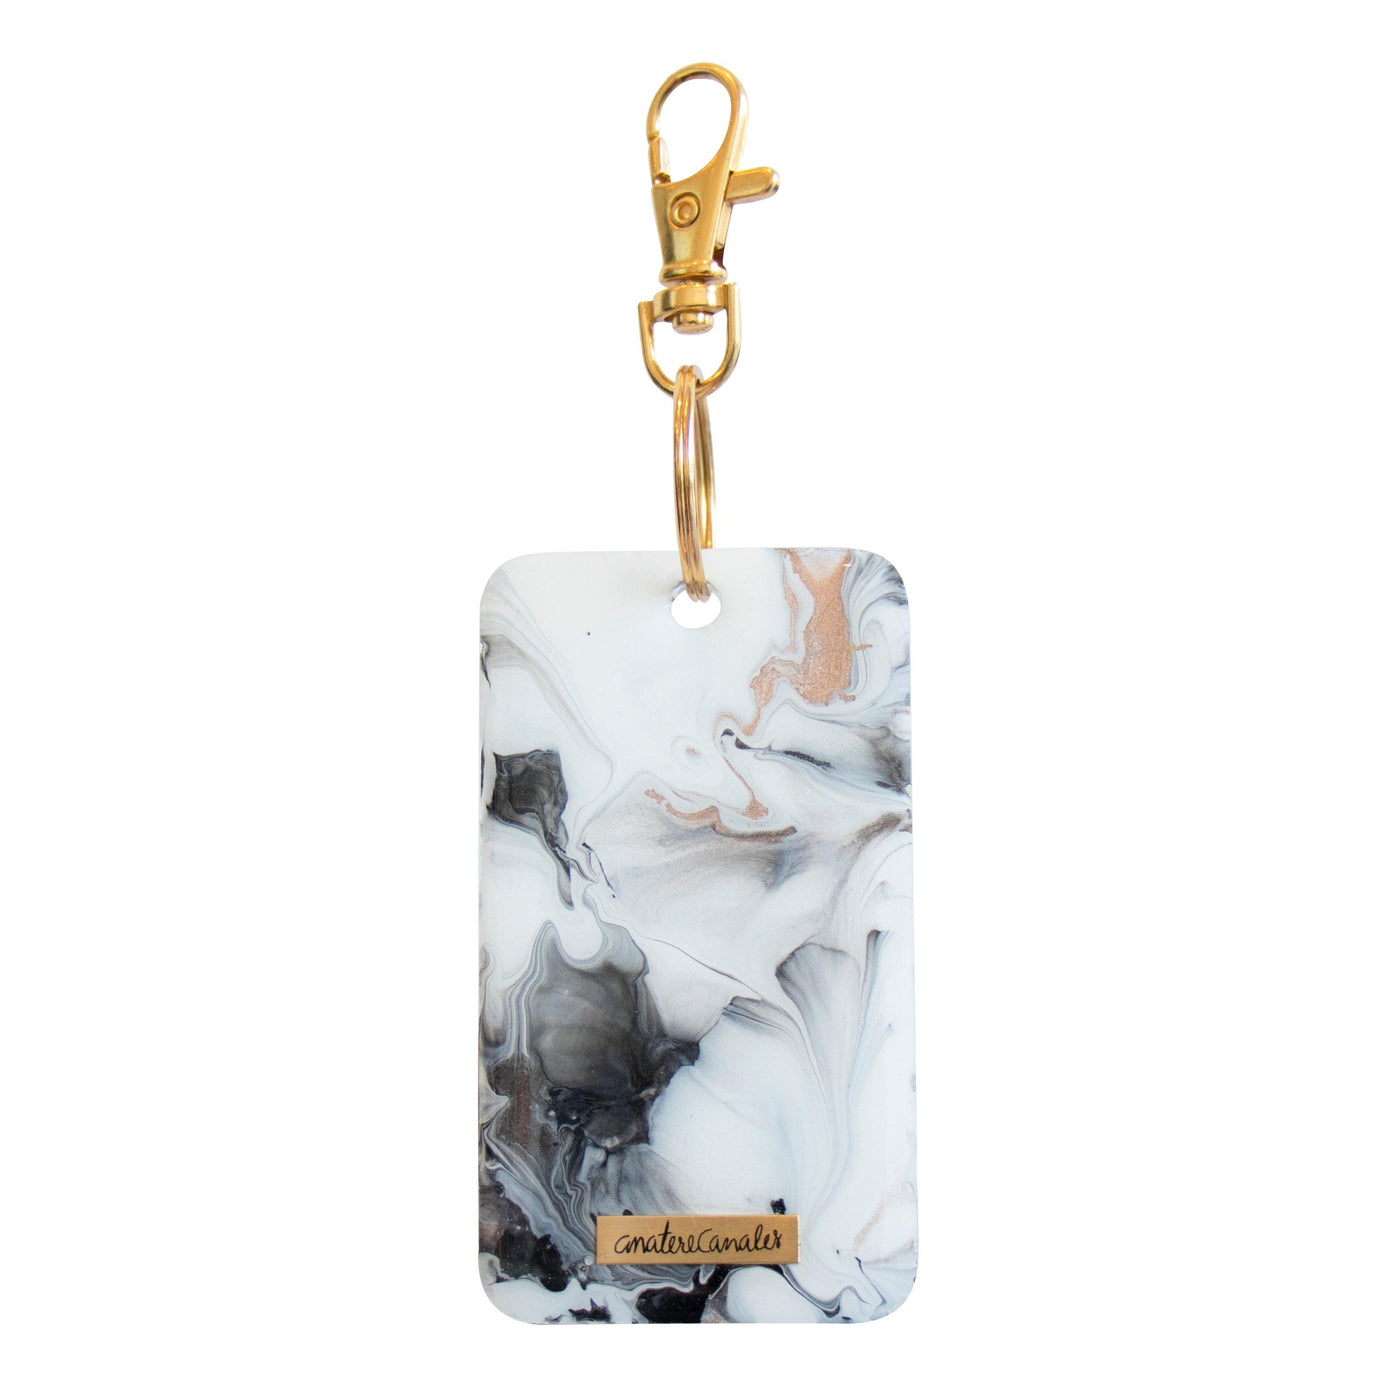 Sueño Classic Marble Rectangular - Ana Tere Canales